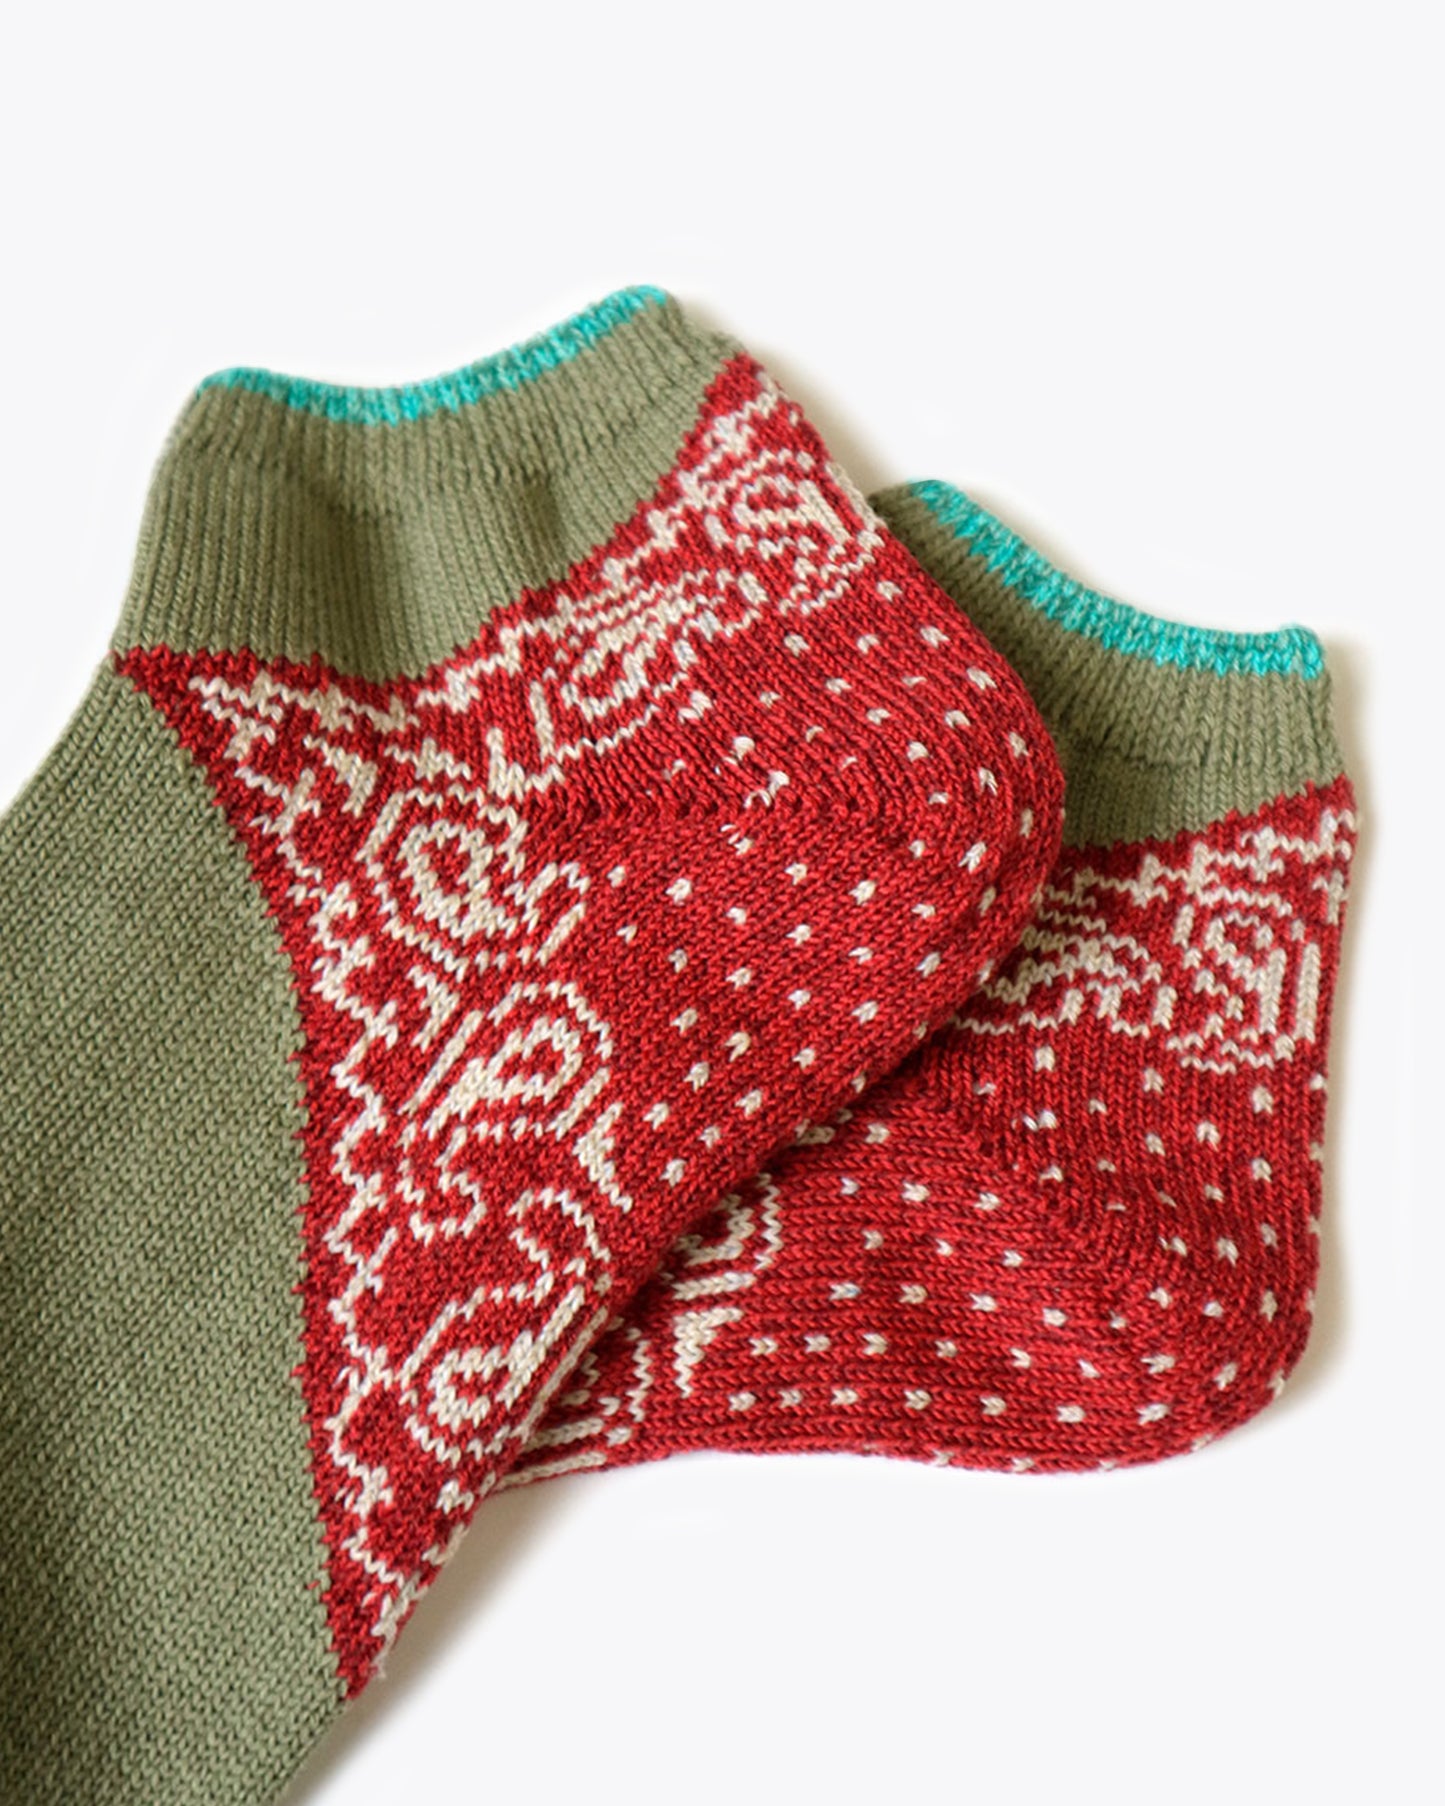 A pair of moderately thick ankle socks with a paisley bandana heel.